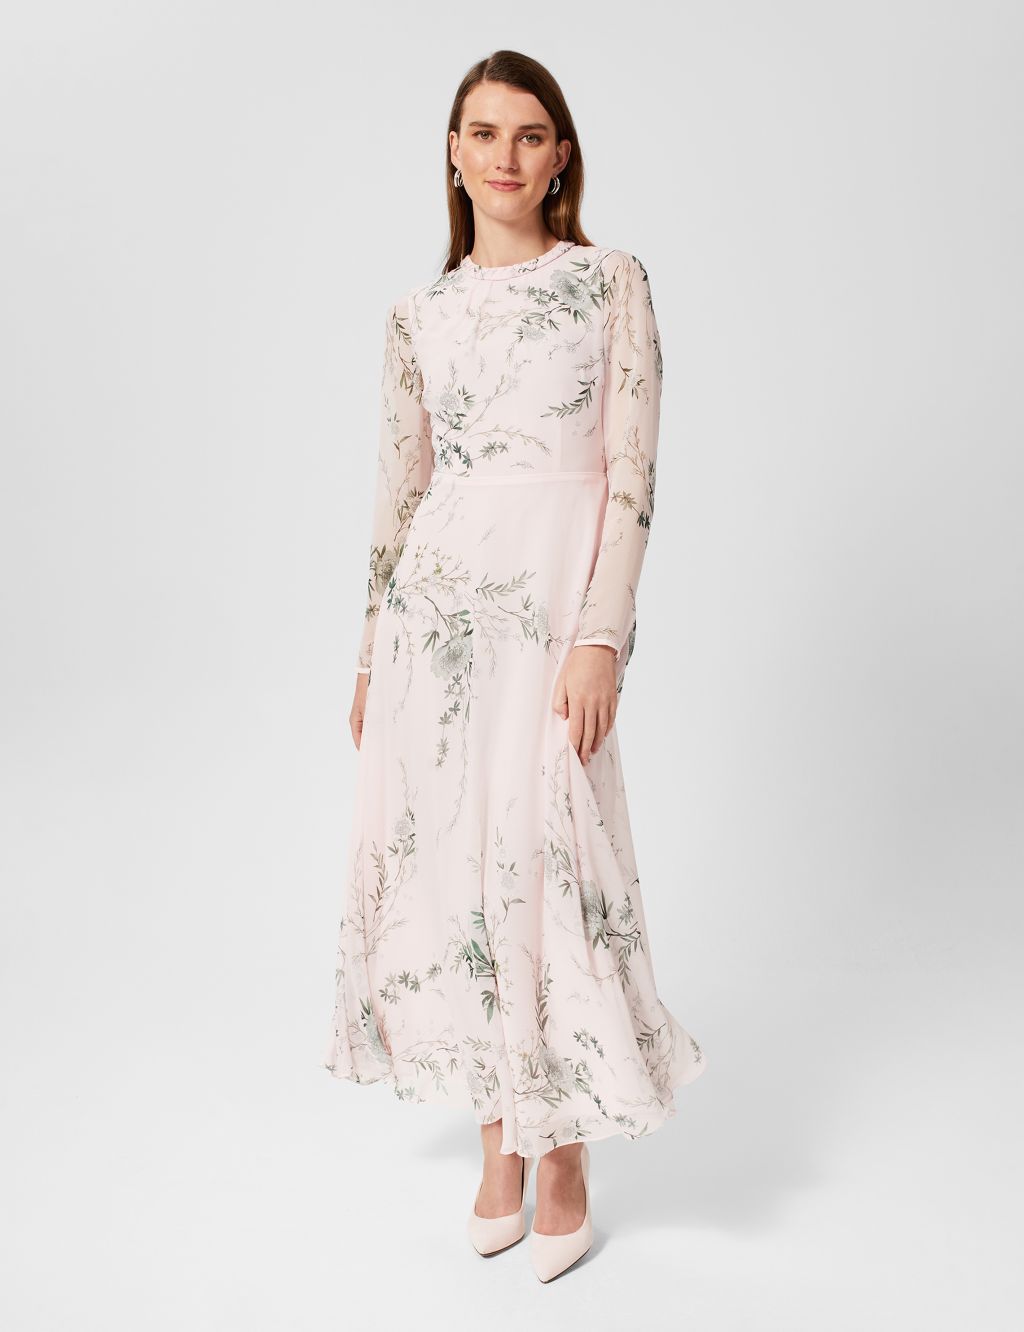 Pure Silk Floral Midaxi Swing Dress image 1